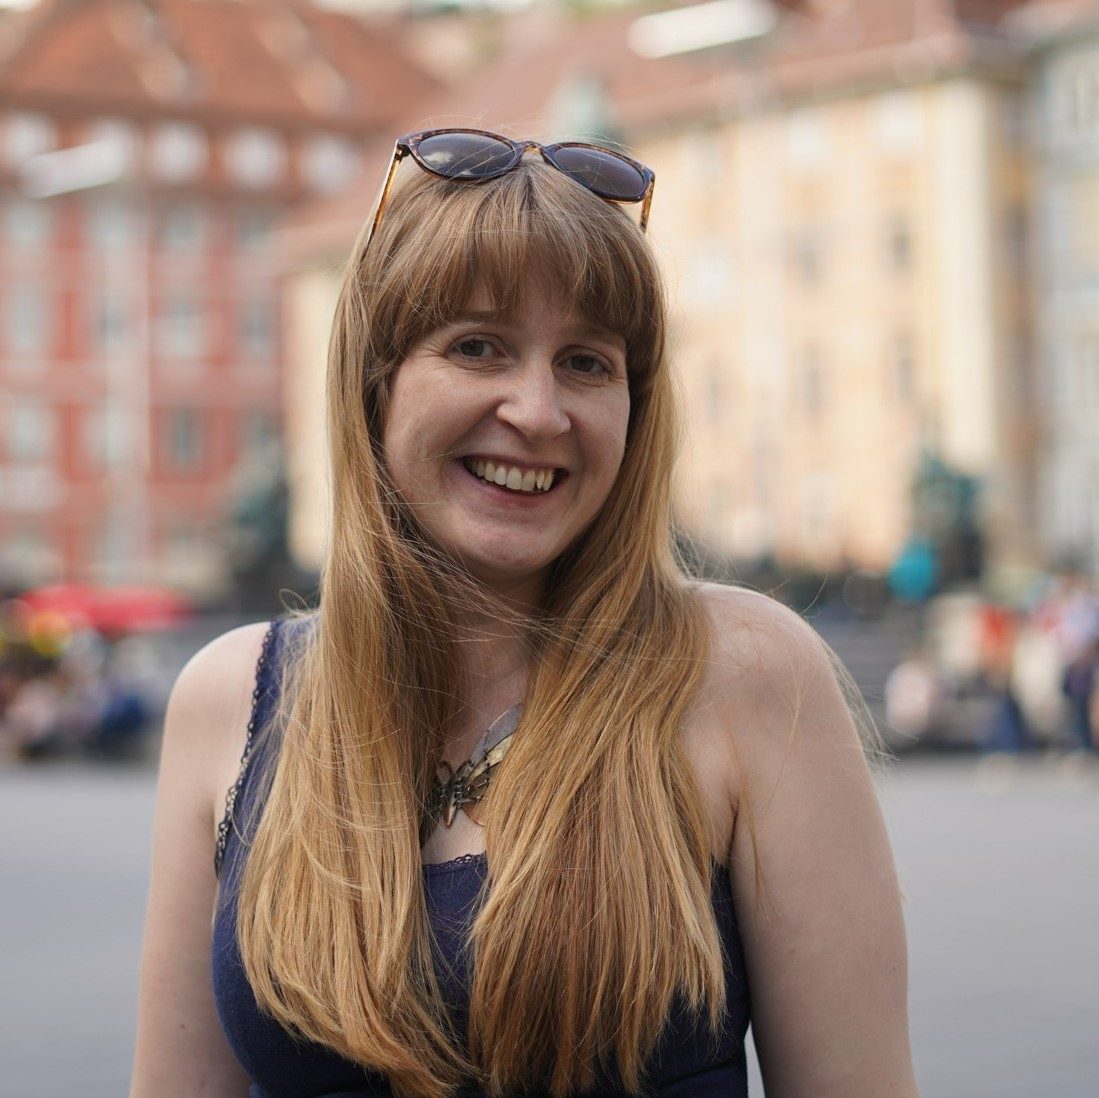 Steph Dyson, a freelance travel journalist, standing in a square in Graz, Austria